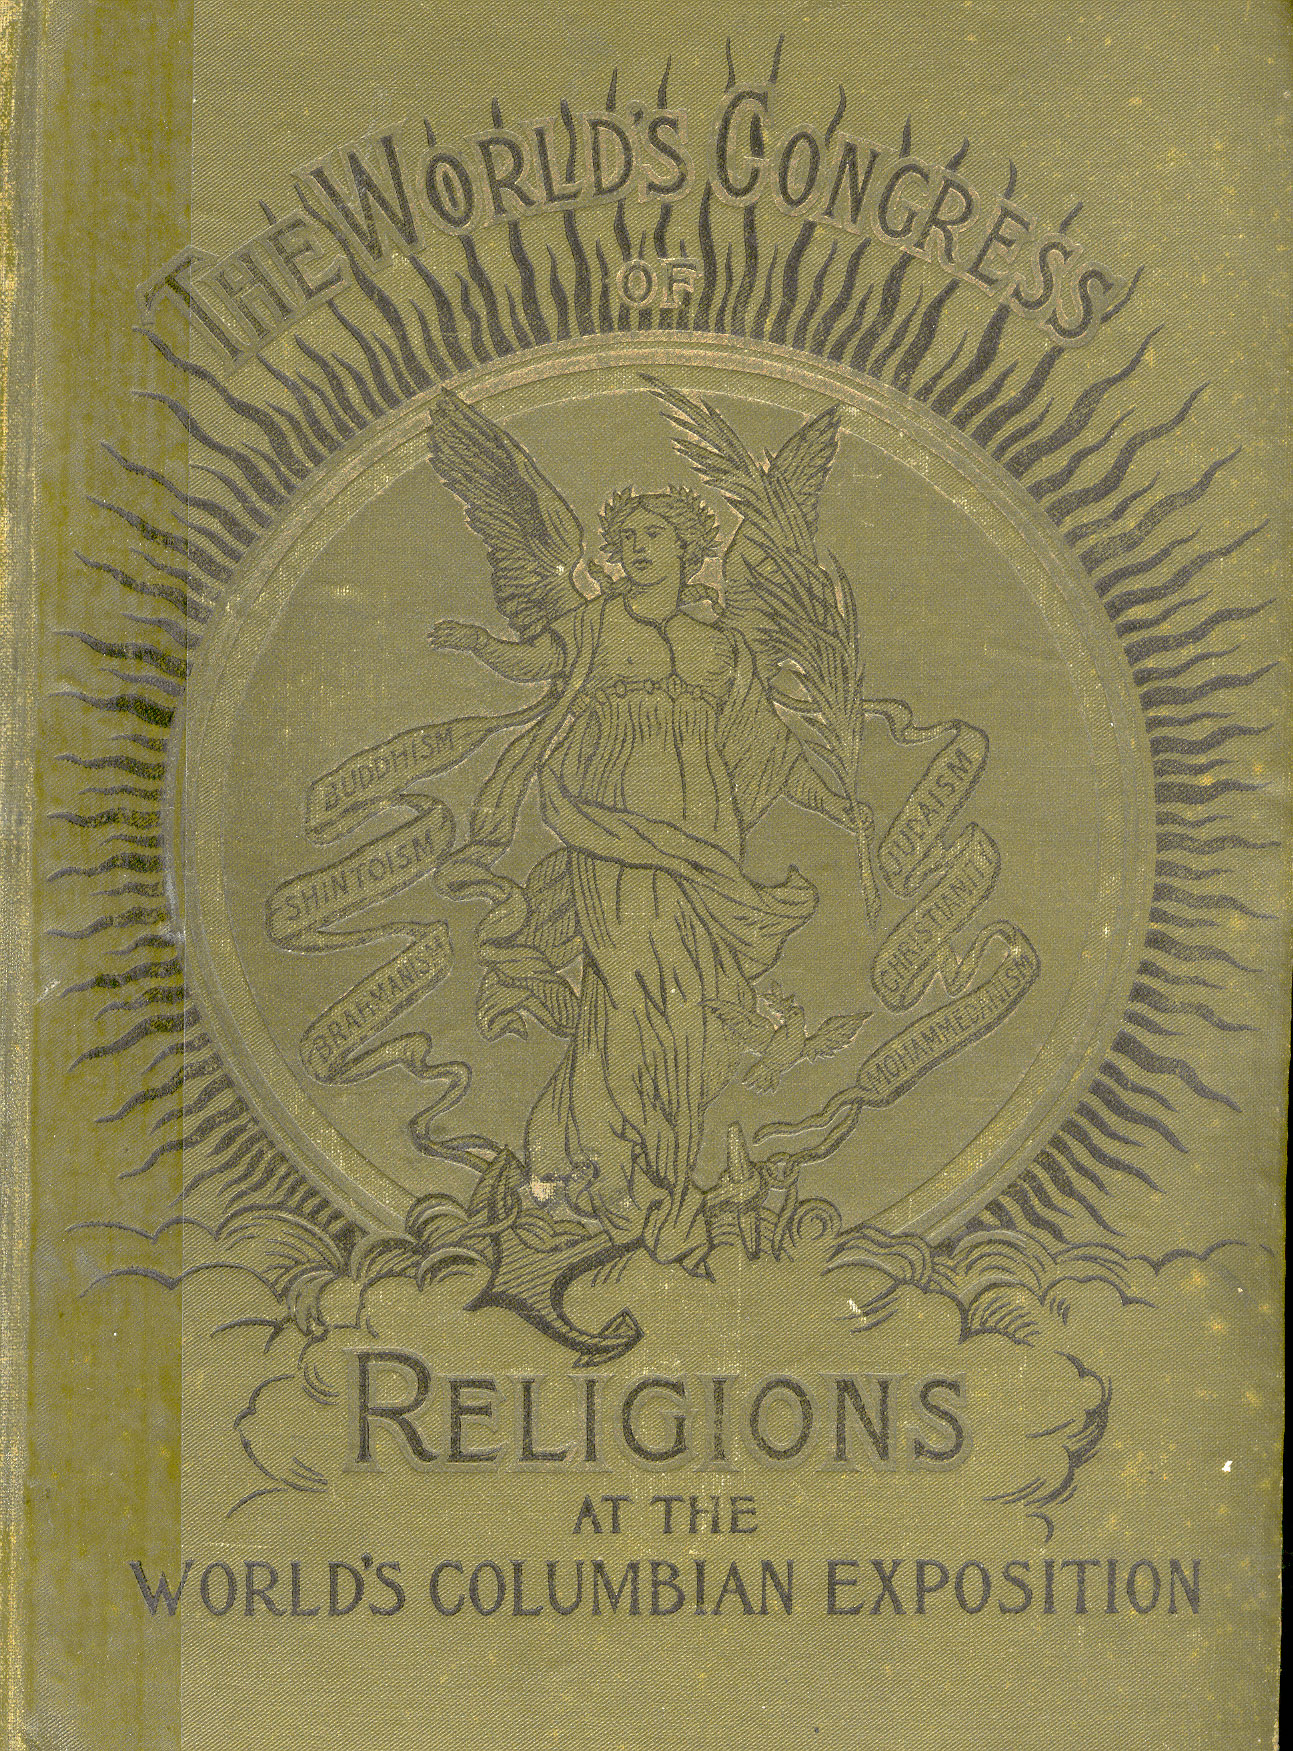 THE PARLIAMENT OF RELIGIONS, 1893